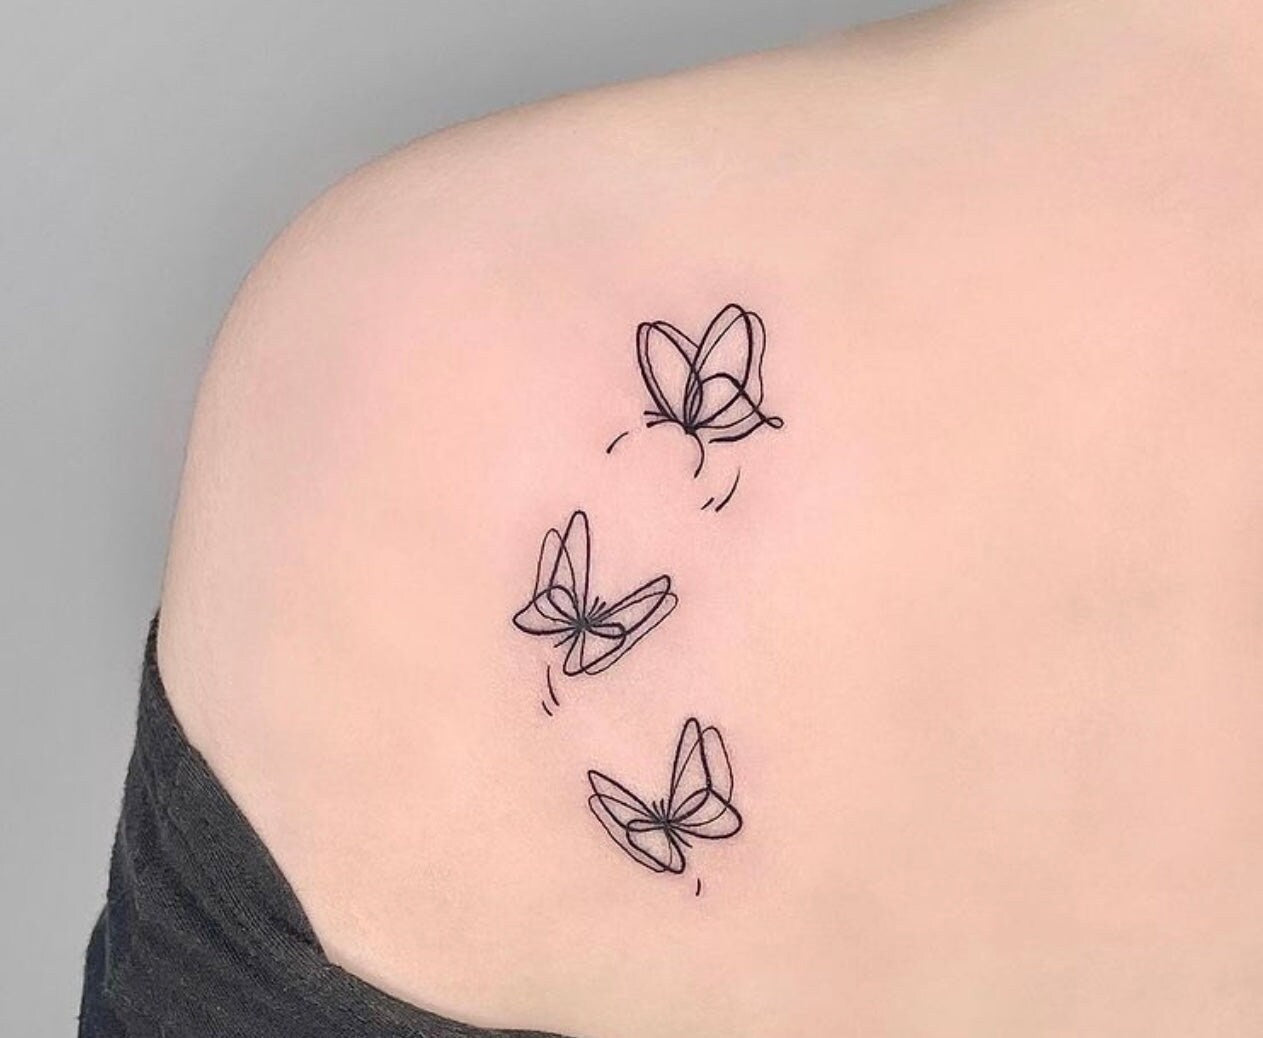 Blvk Temple Tattoo Cairns  Butterfly sternum piece by our artist Gracie   Contact us now for your next tattoo or come see the crew at Cairns  premier tattoo studio BLACK TEMPLE